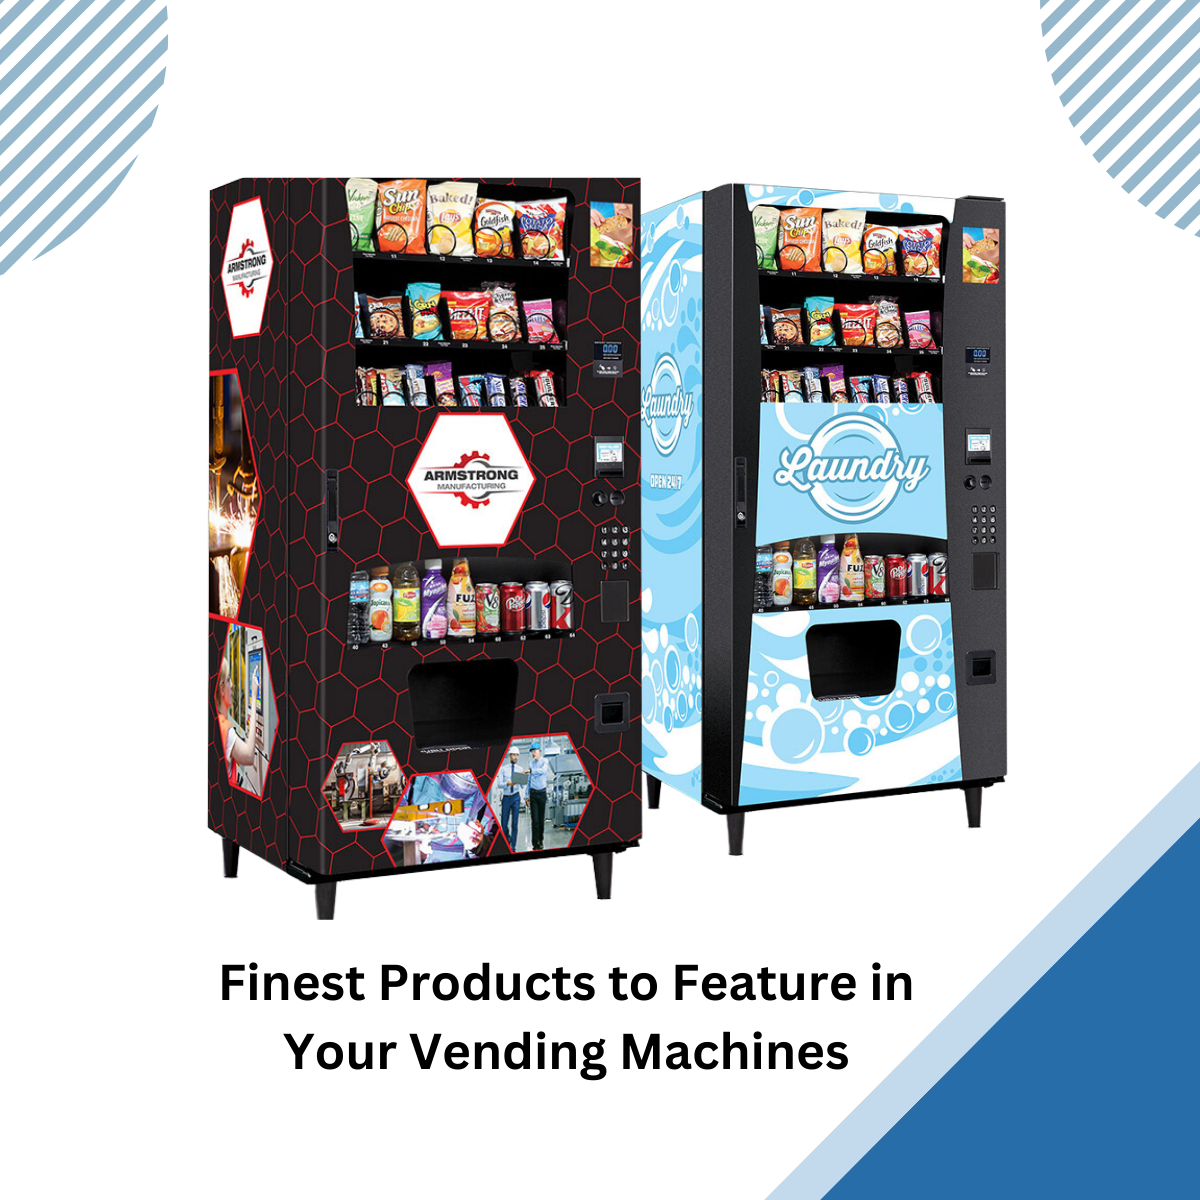 BEST PRODUCTS FOR YOUR VENDING MACHINES